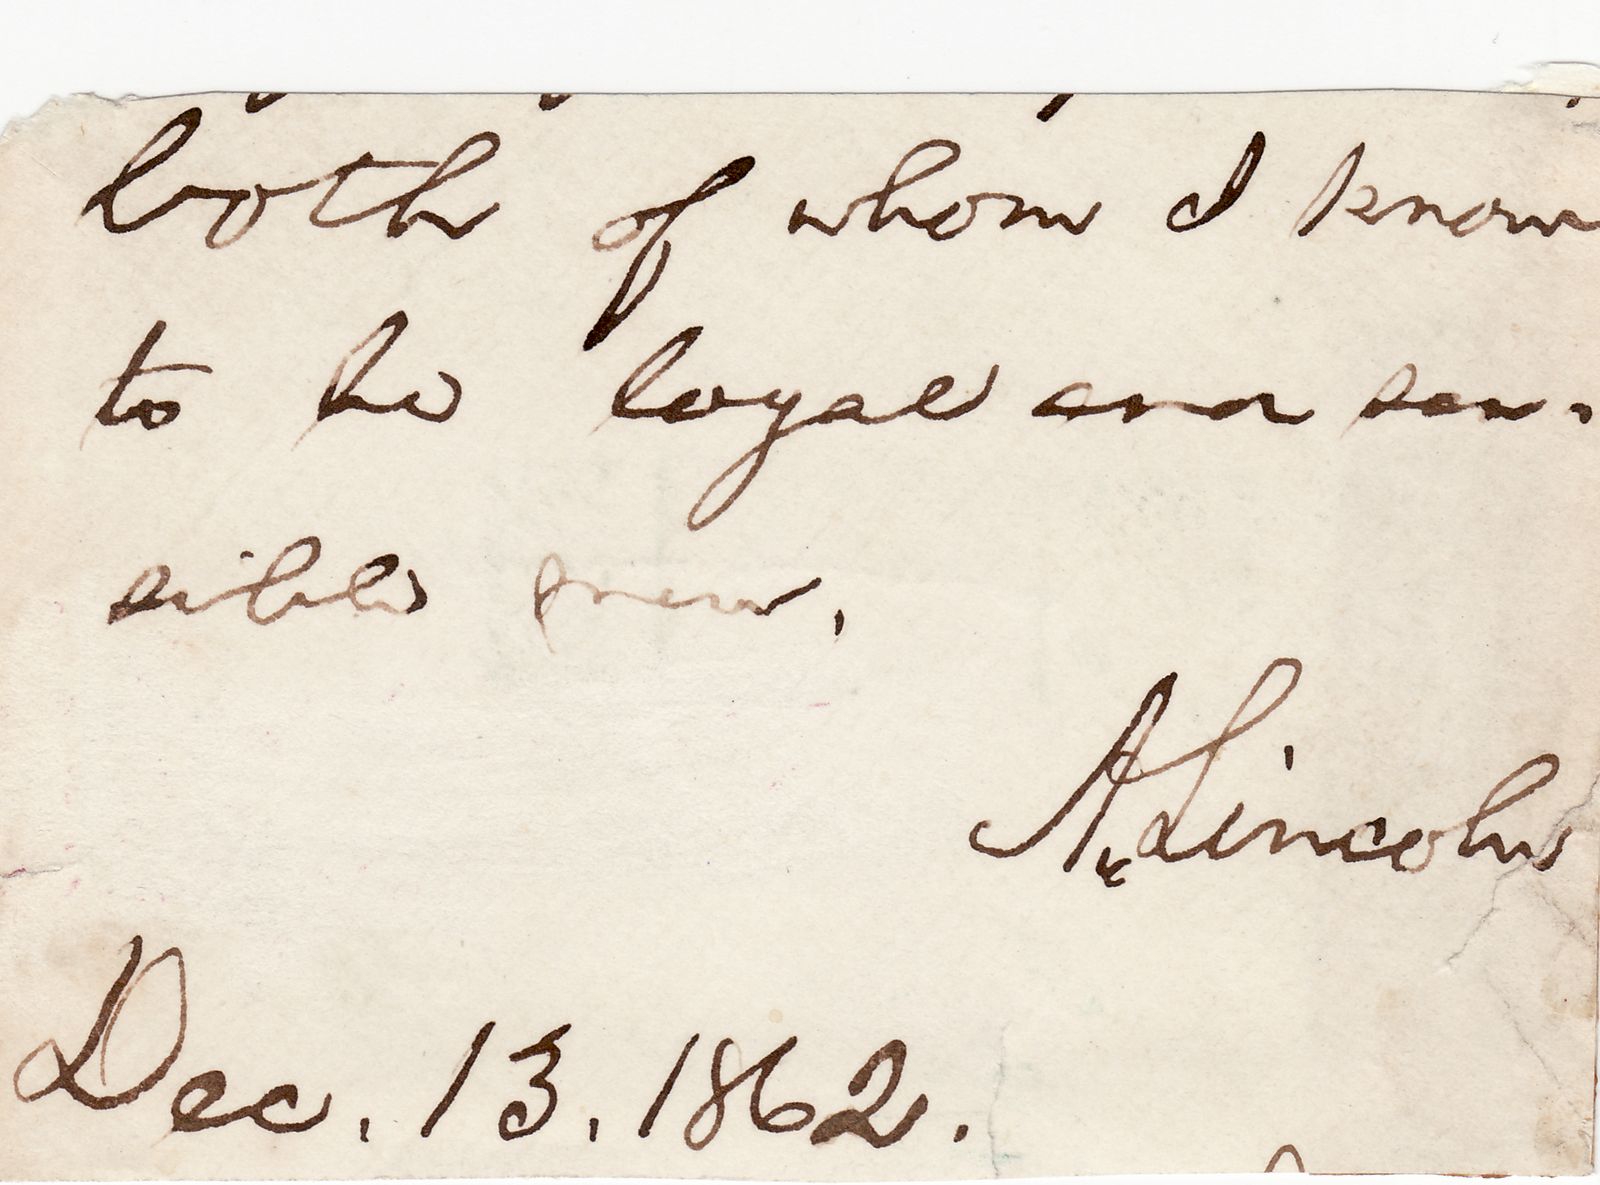 Lincoln Directs His “Loyal and Sensible” Jewish Friend, Abraham Jonas to Review a Case of Disloyalty